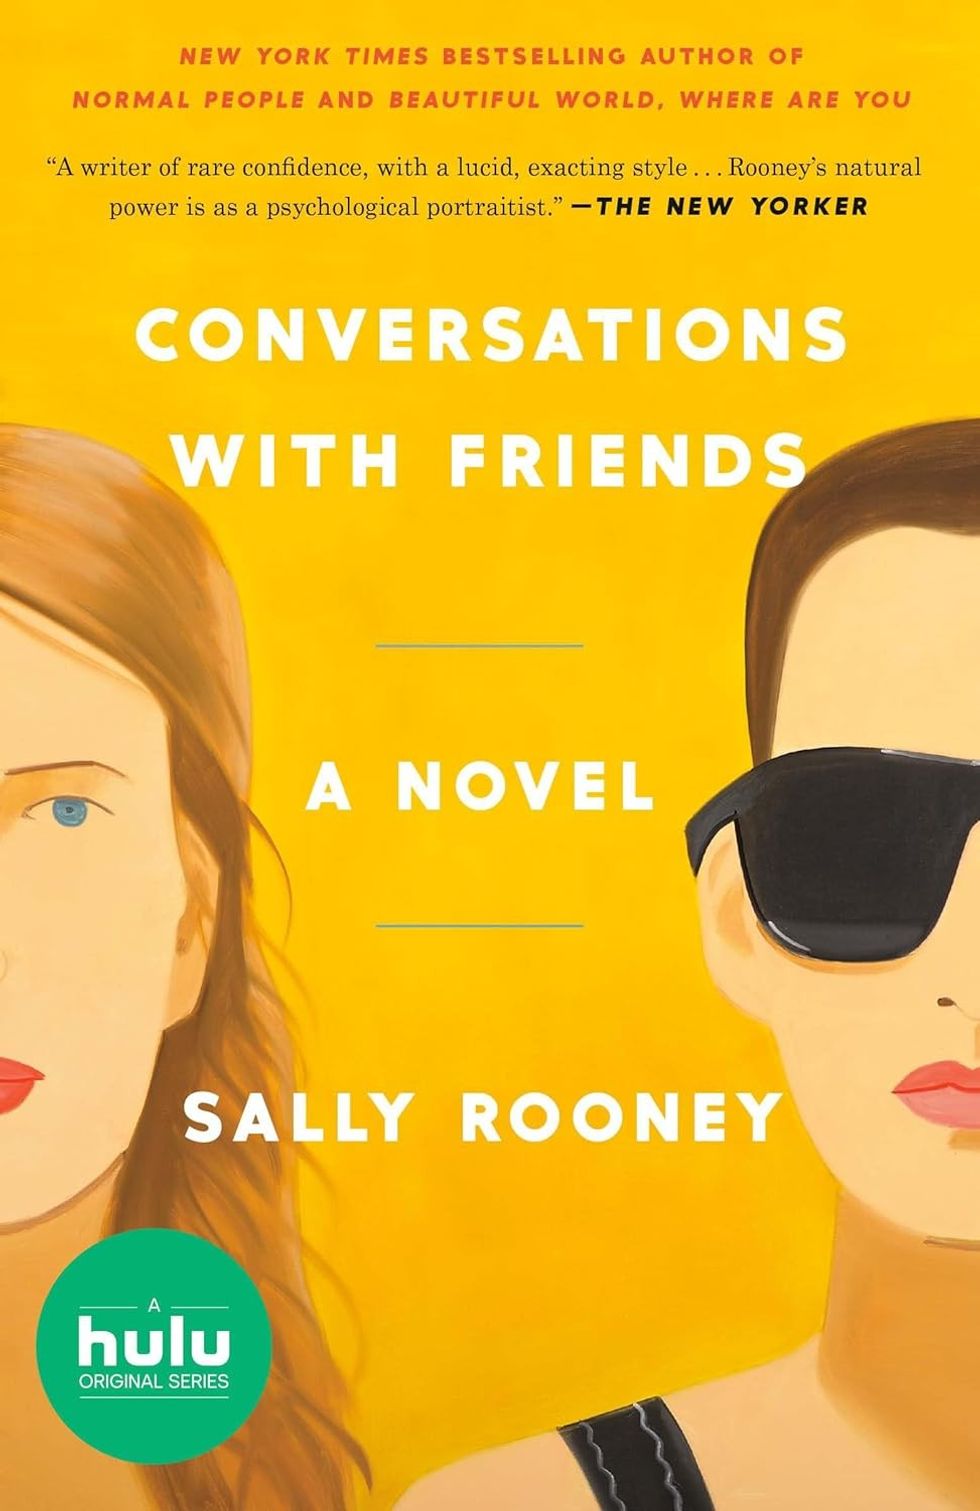 "Conversations with Friends" by Sally Rooney